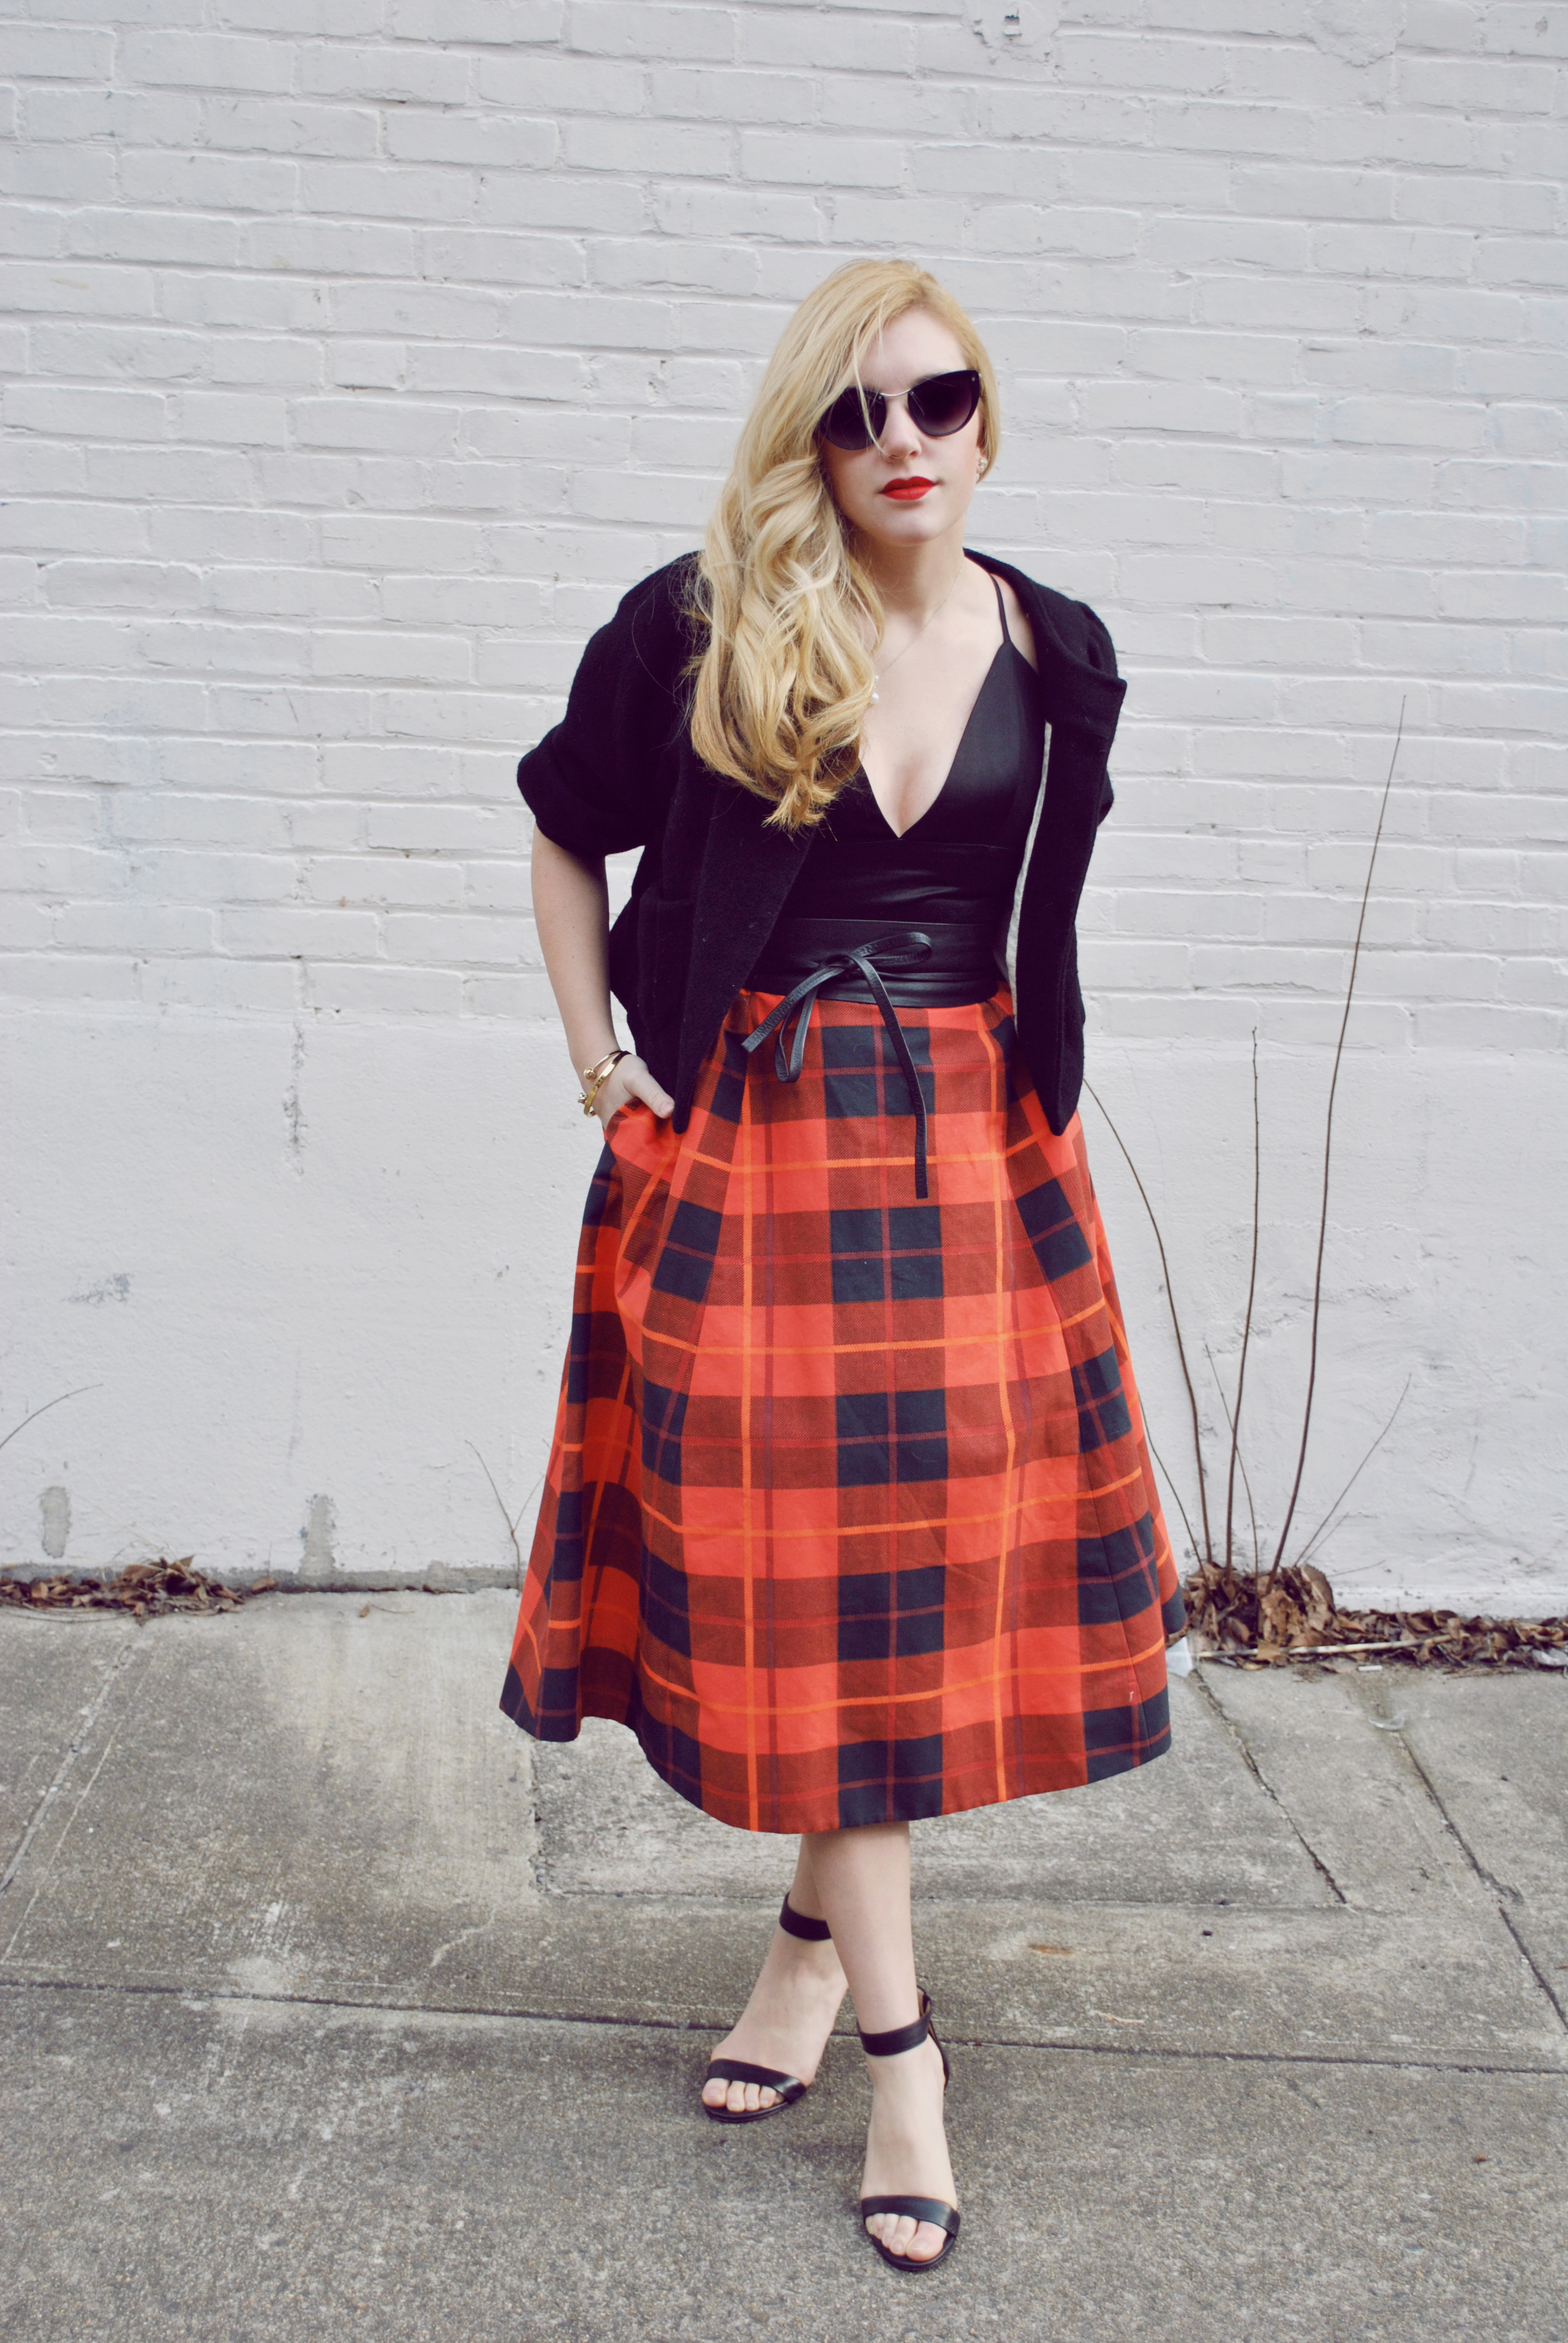 thoughtfulwish | meredith wish // boston // boston blogger // fashion blogger // plaid // valentine's day outfit // valentine's day look // red lip // #ootd // kate spade